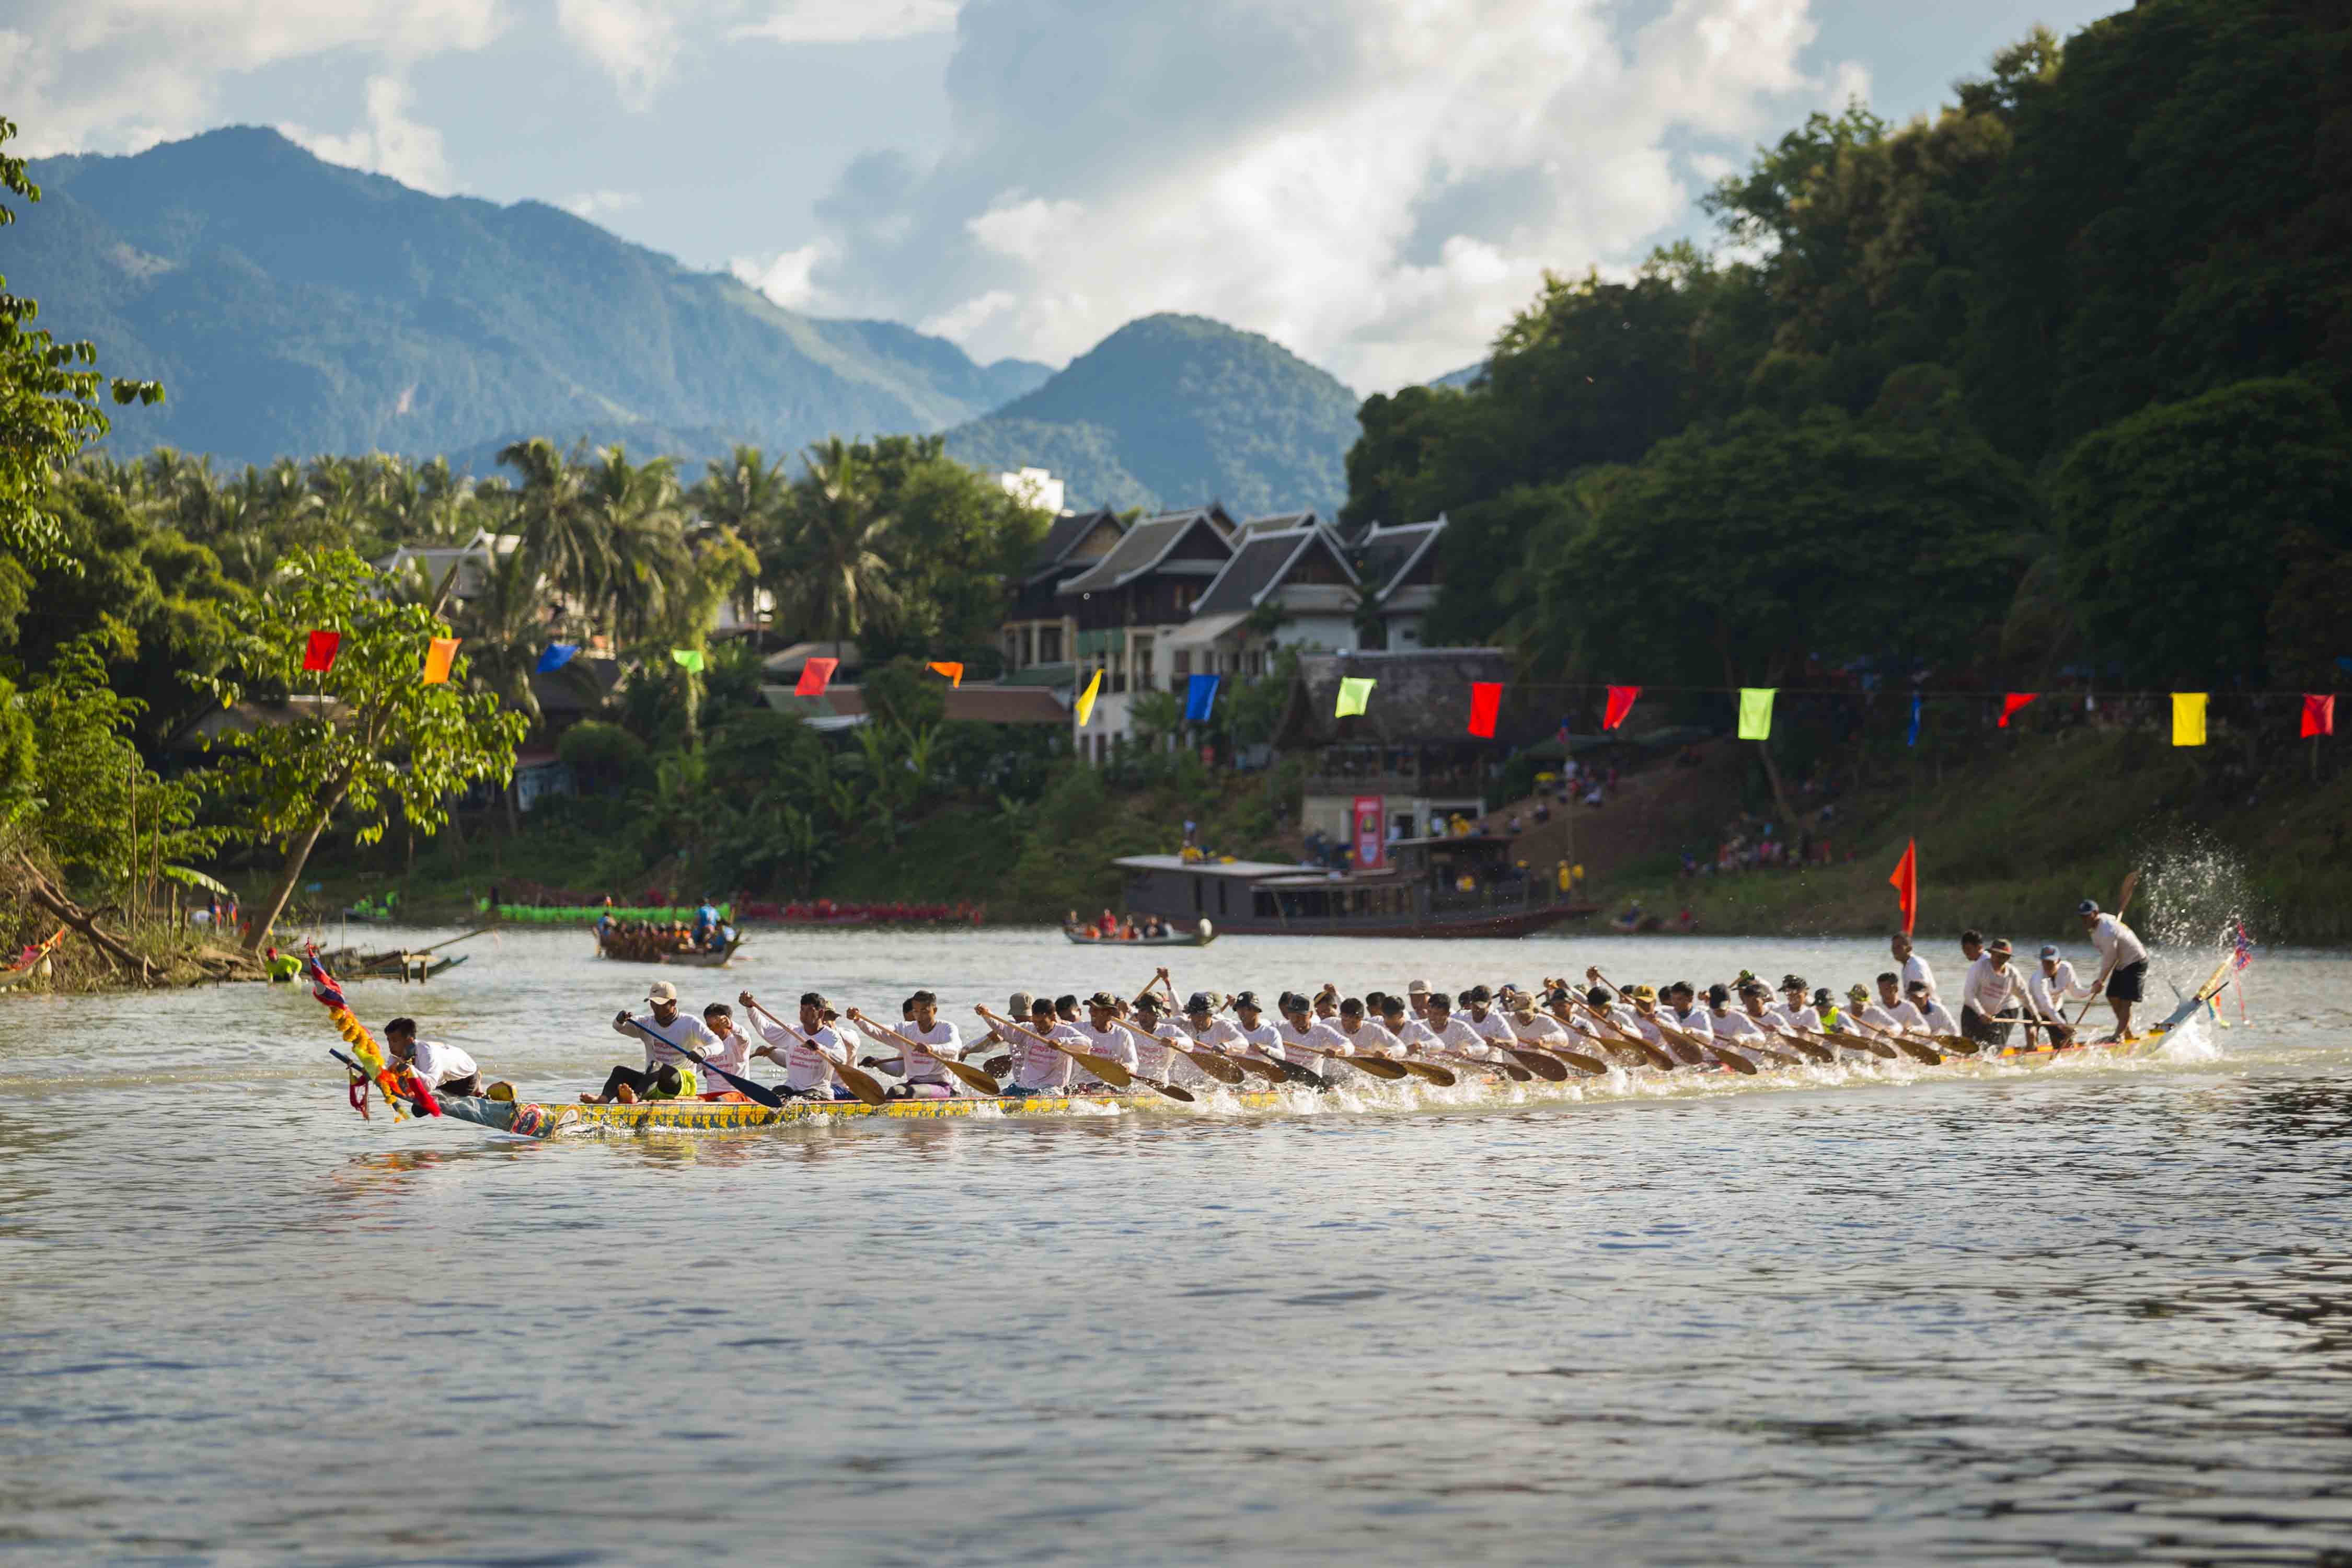 Picture: Boat racing competition on the Khan River in Luang Prabang.